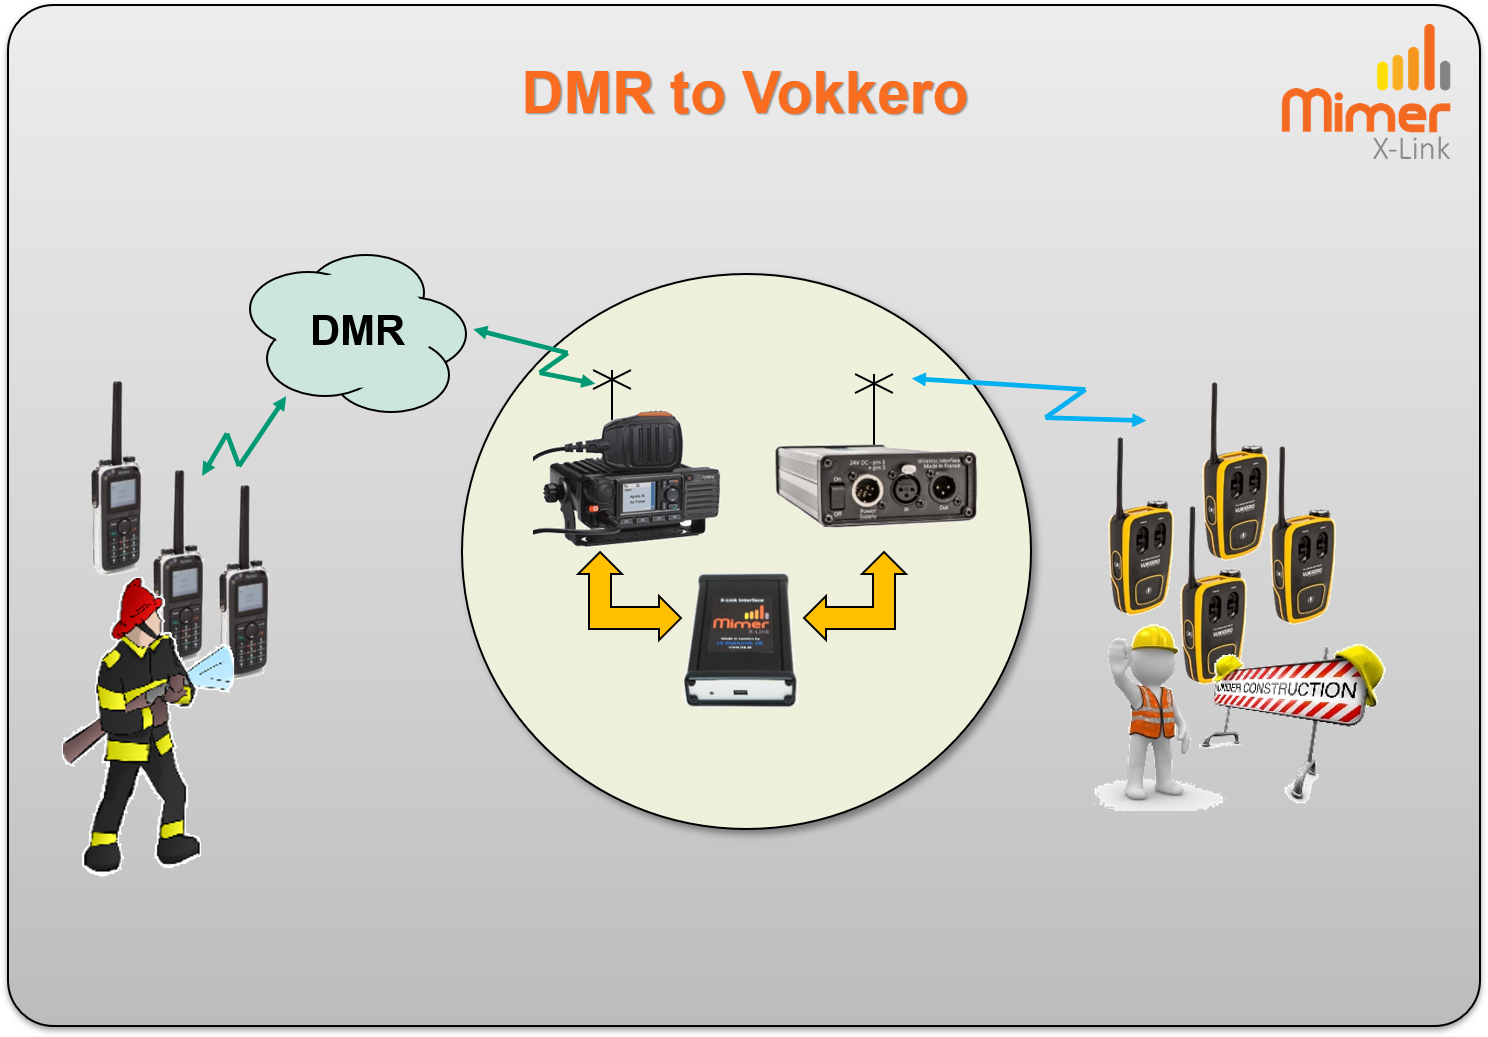 X-Link connection with DMR and Vokkero